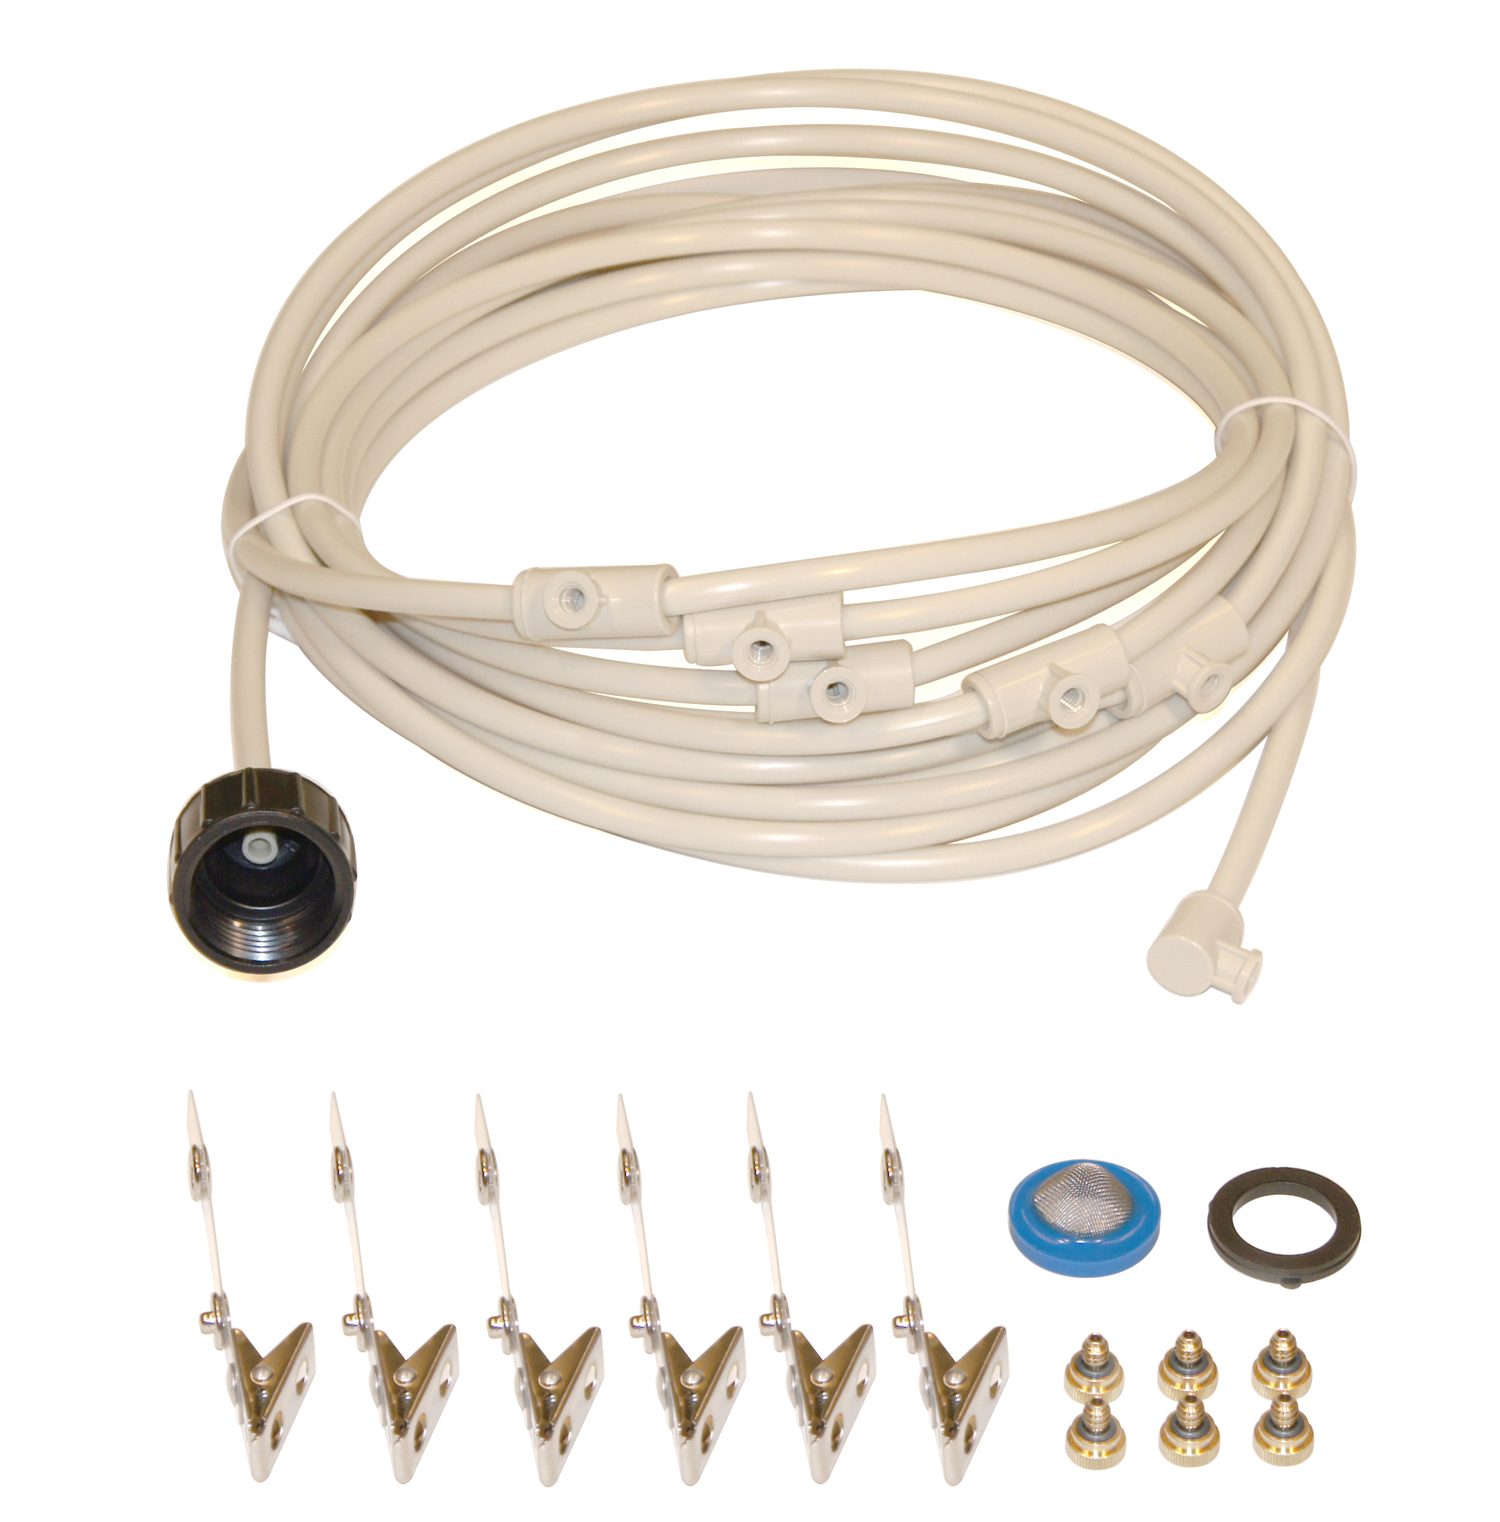 SPT SM-1406: 1/4" Misting Cooling Kit with 6 Brass Nozzles